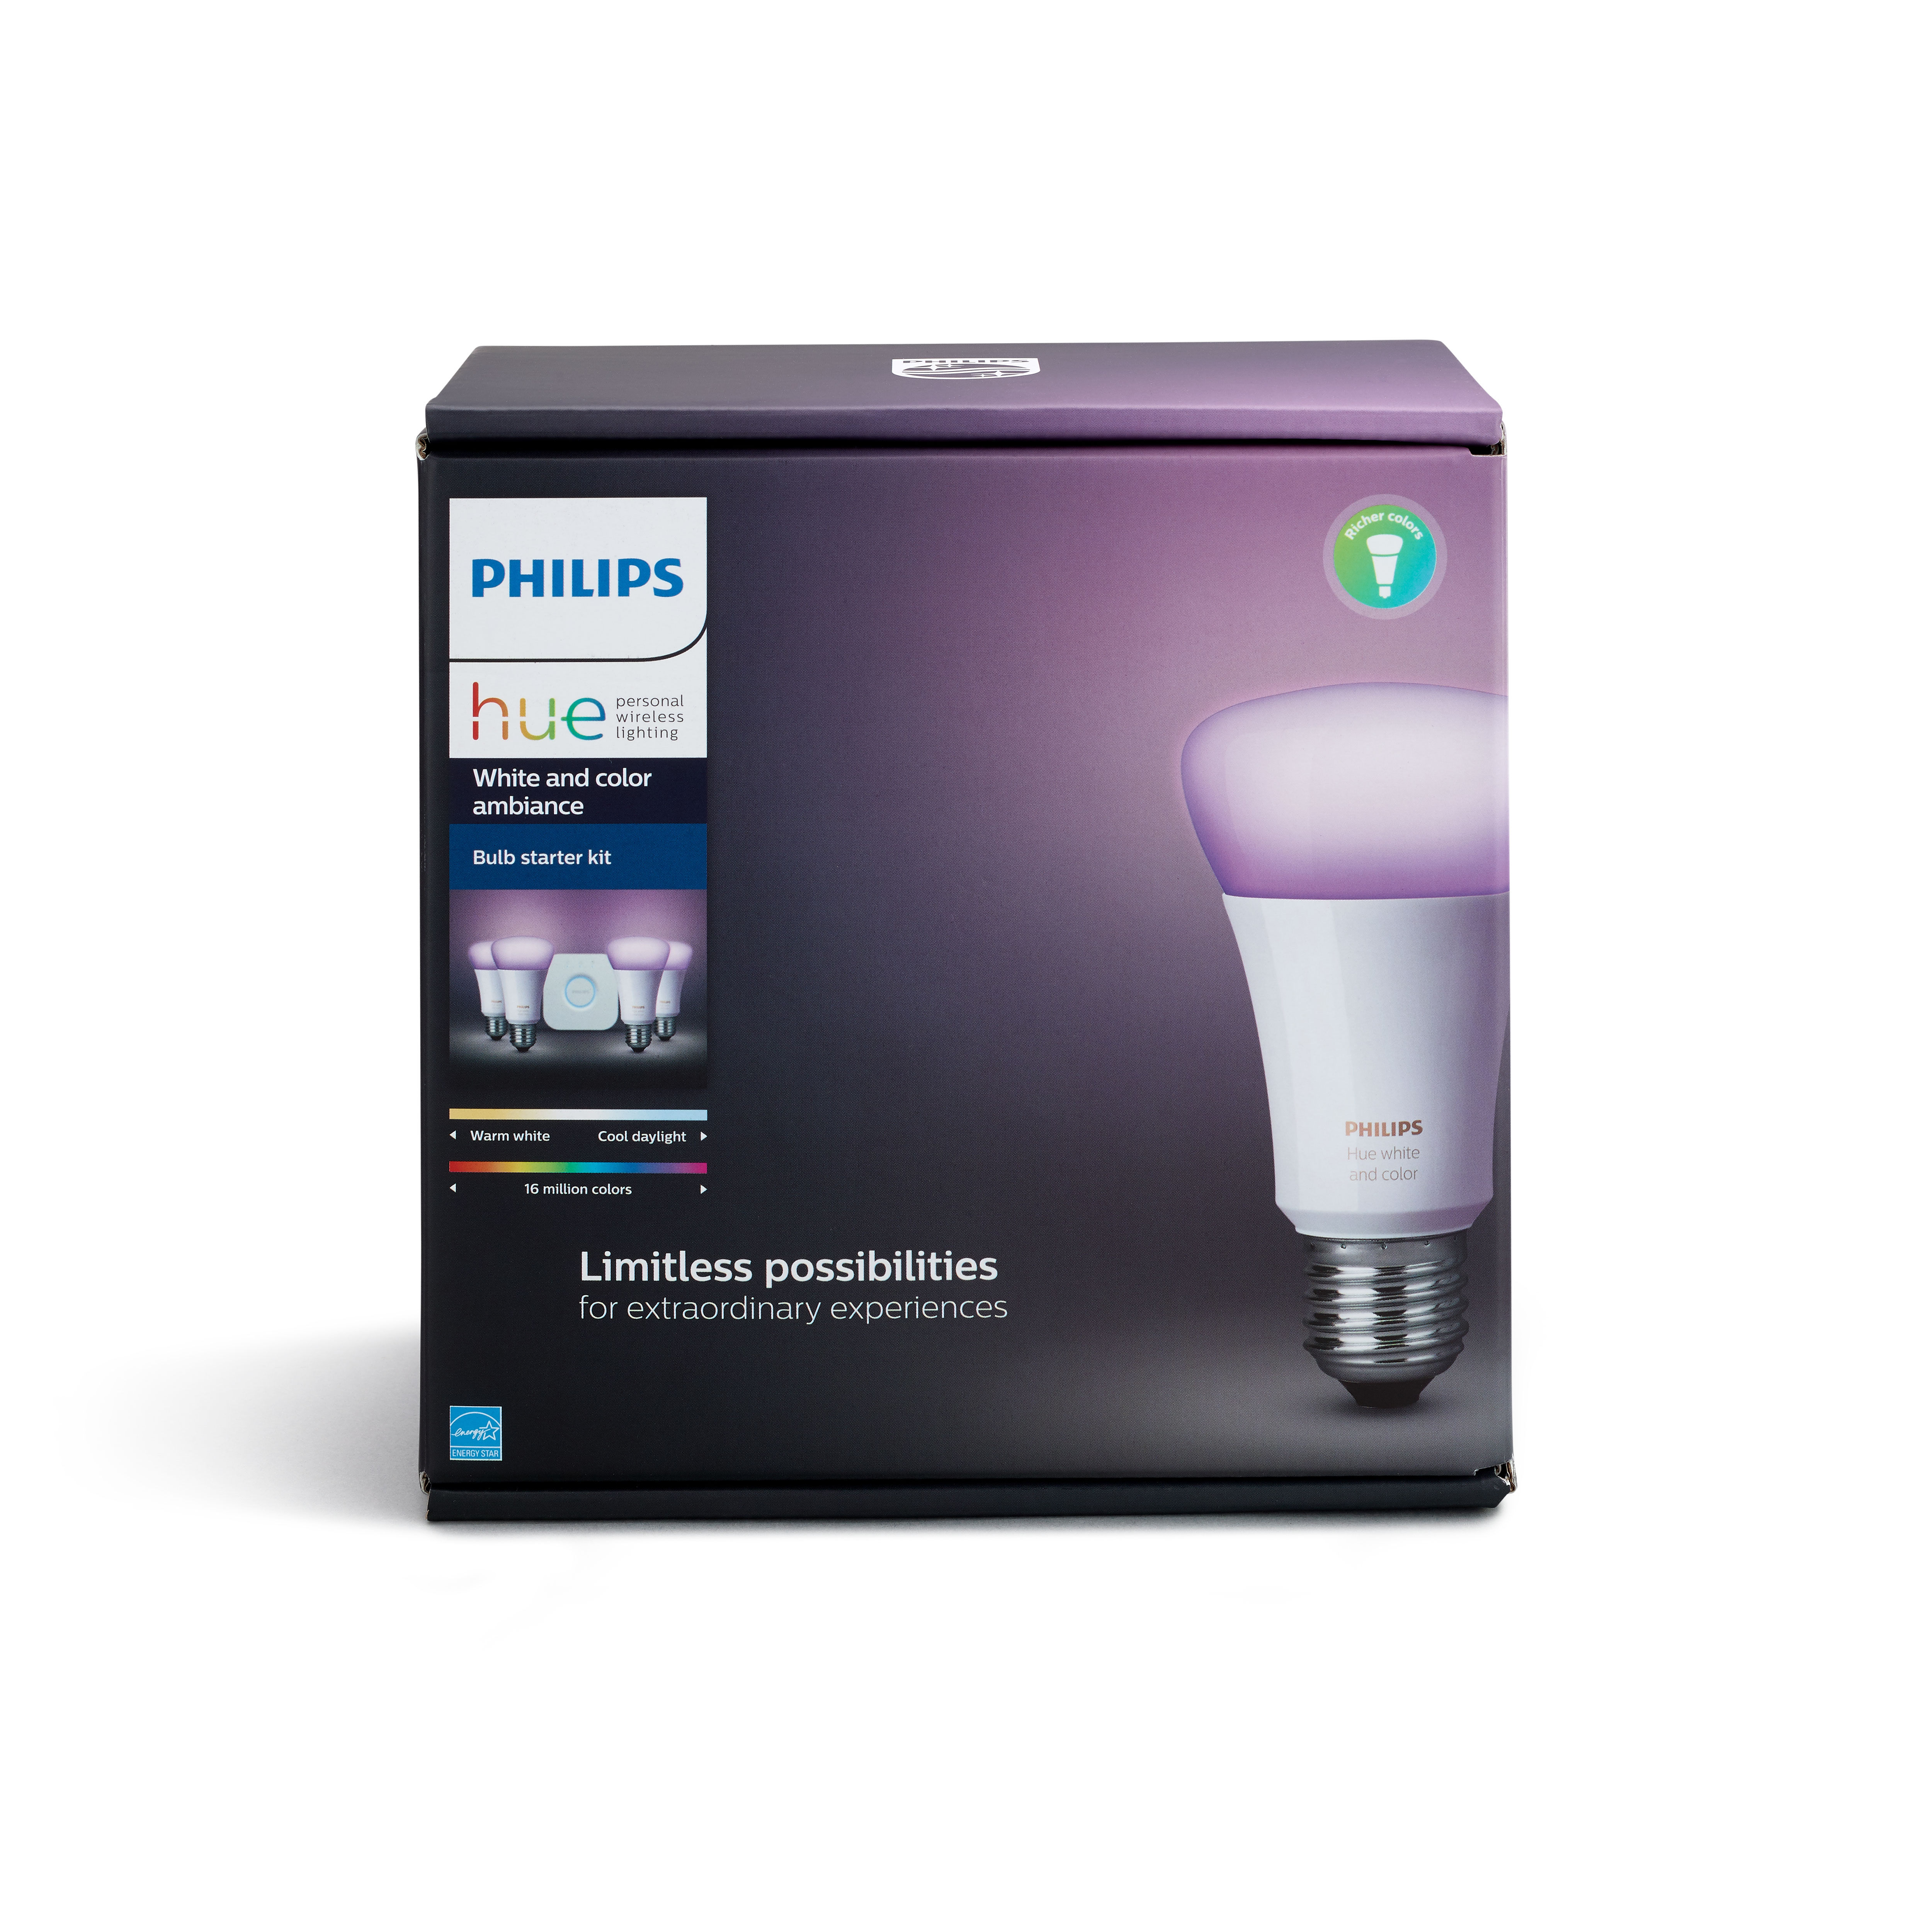 Philips Hue White and Color Ambiance A19 Smart Light Starter Kit, 60W LED, 4-Pack - image 2 of 7